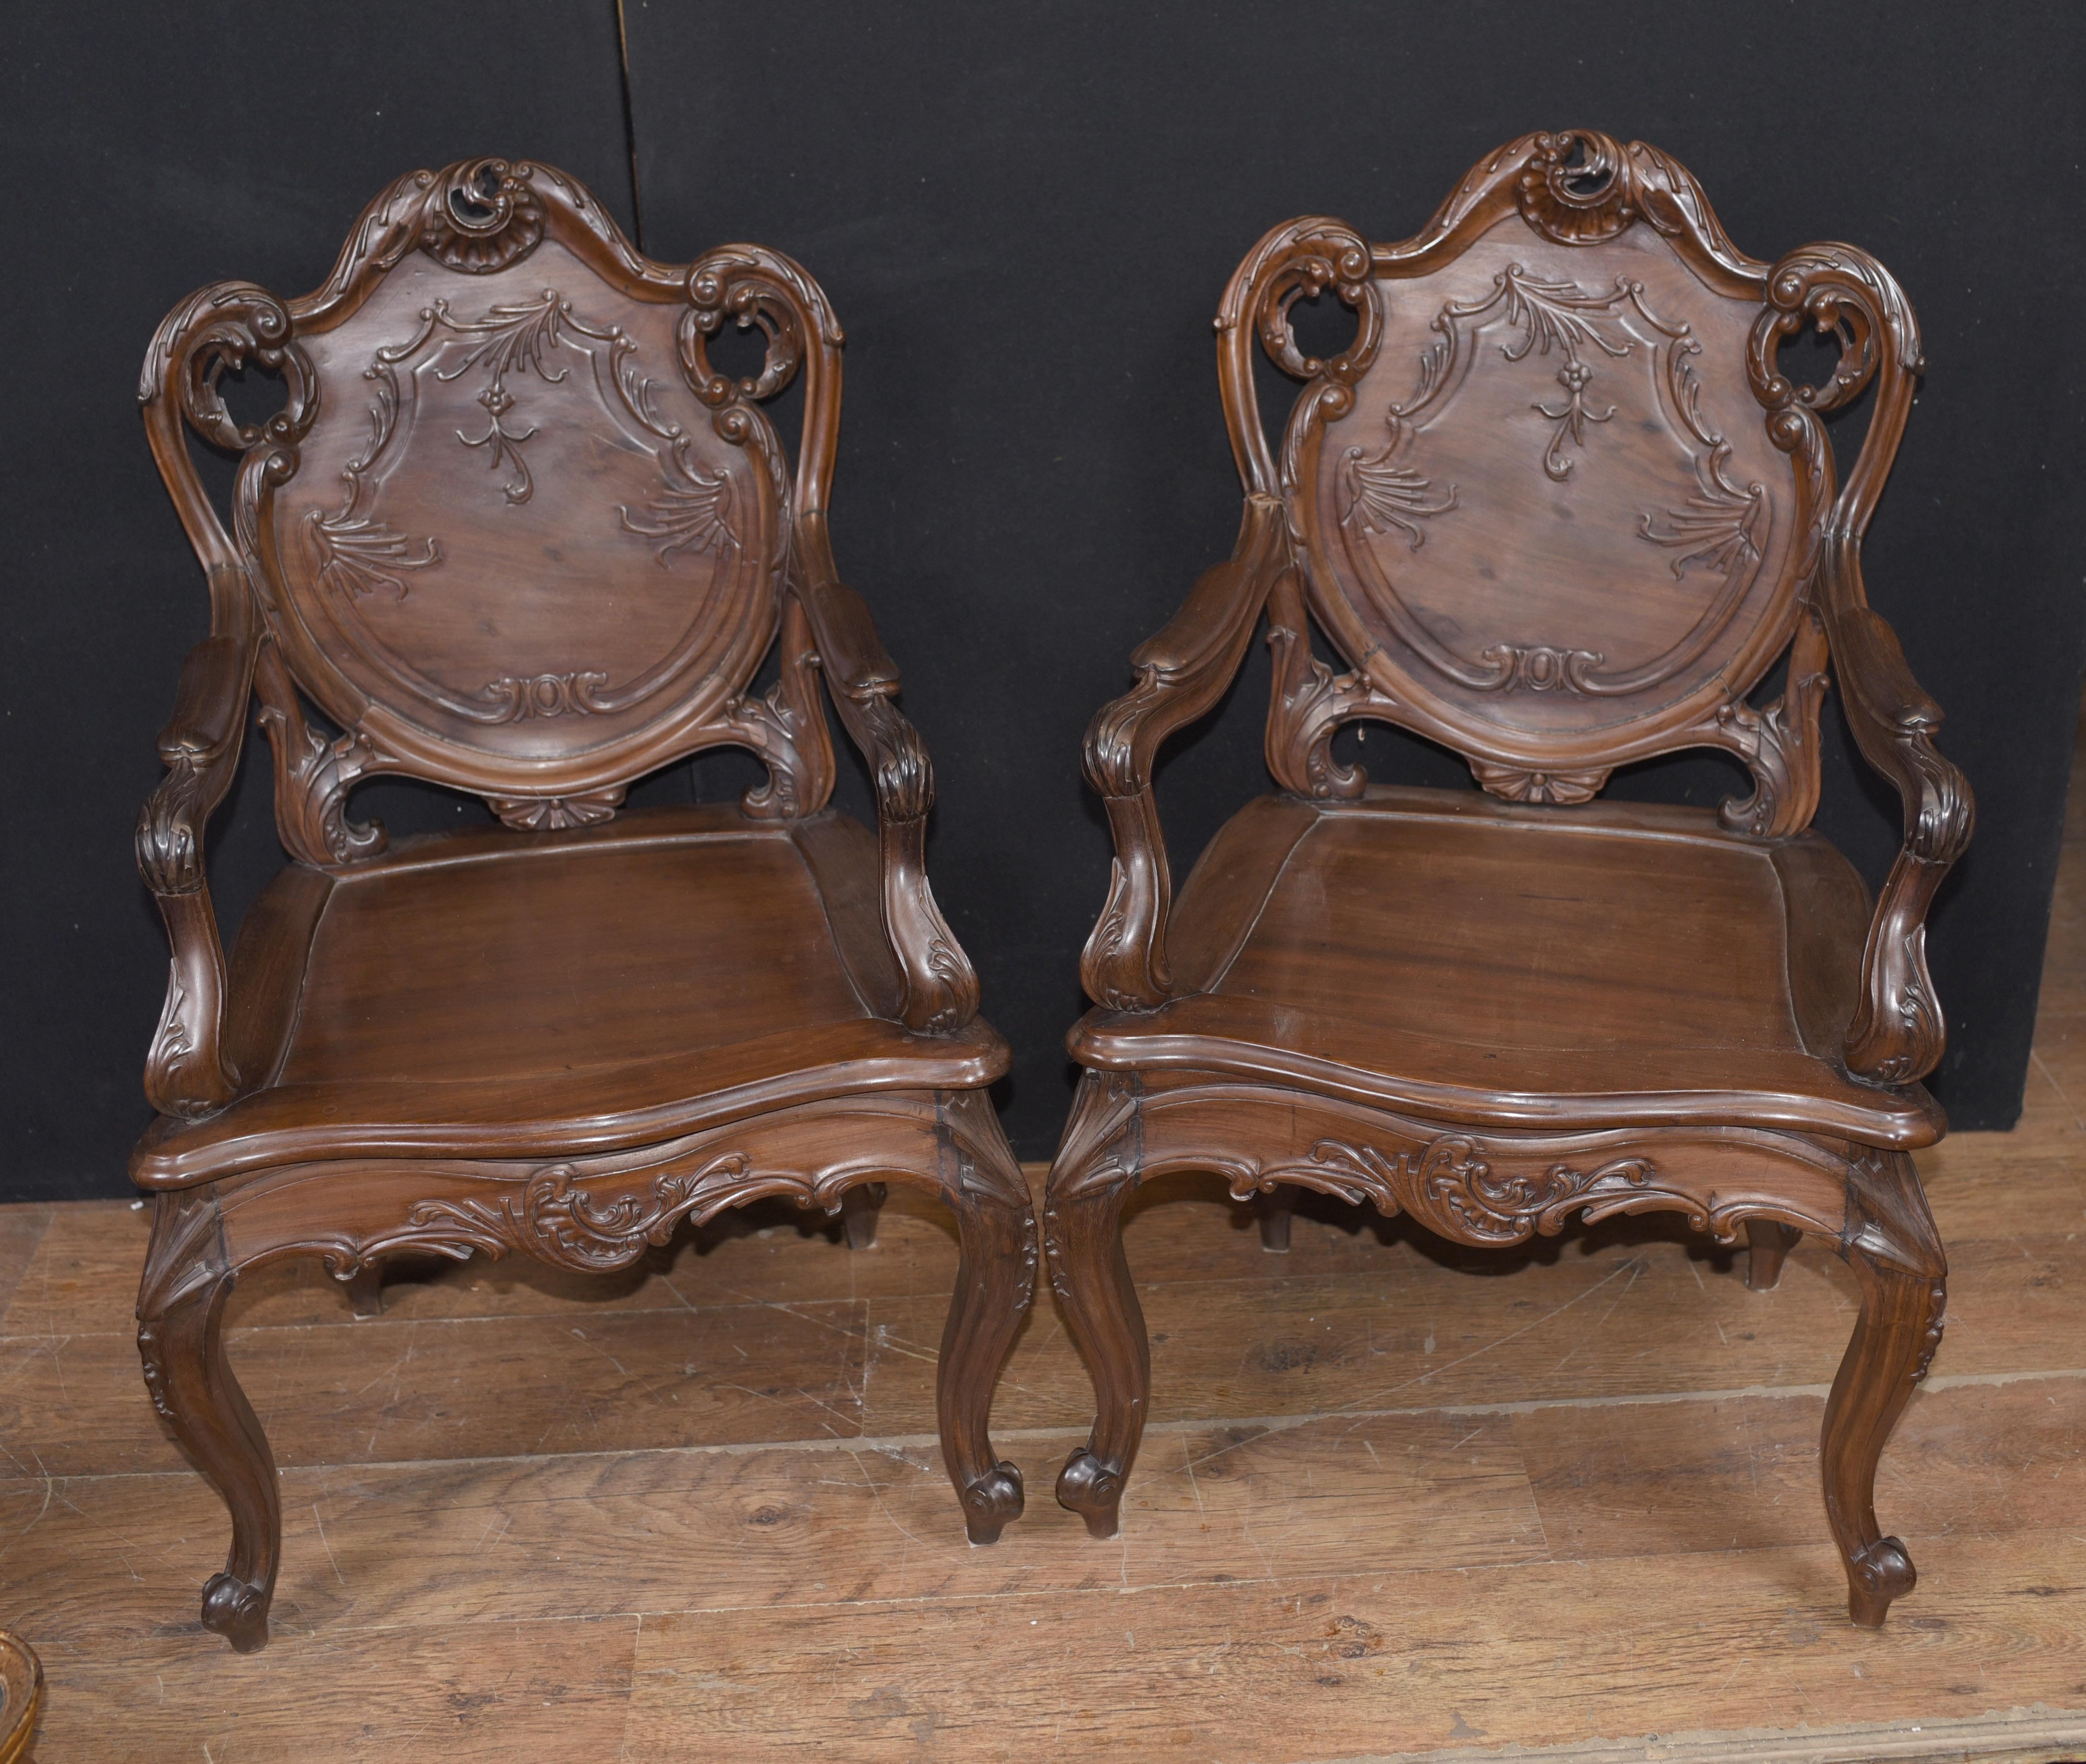 - Gorgeous pair of antique Art Nouveau French arm chairs - We date this gorgeous pair of chairs to circa 1930 - Hand carved from hardwood - very comfortable to sit in - Purchased from a dealer on Marche Biron at the Paris antiques markets.